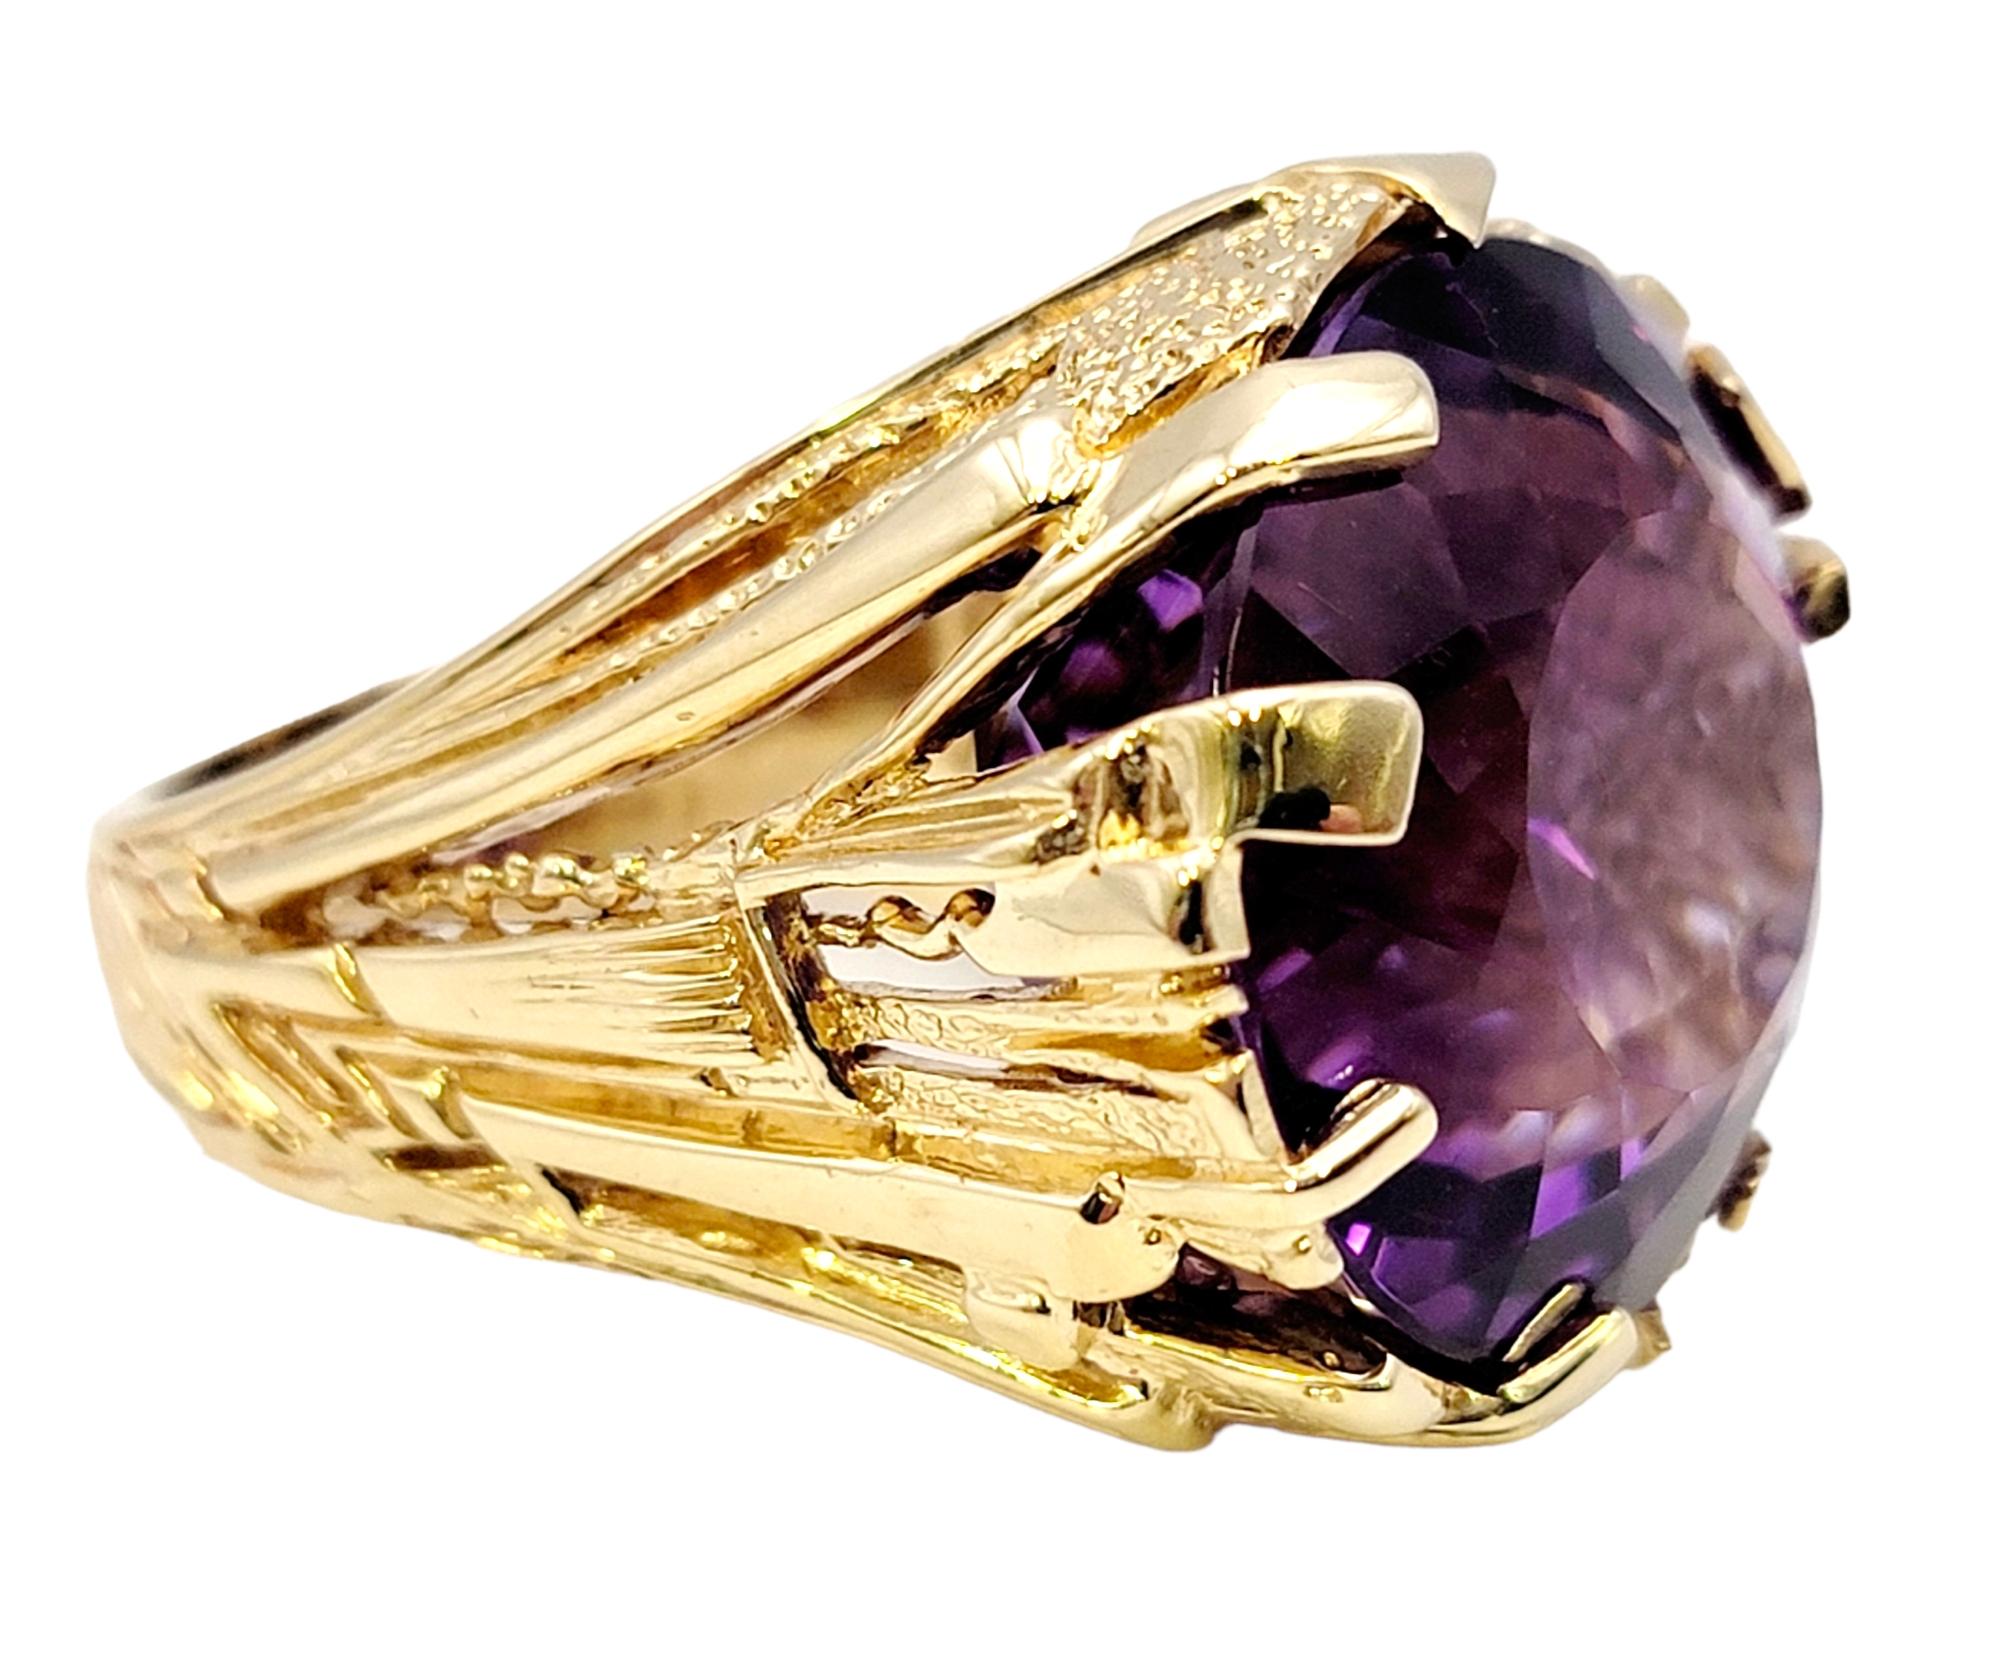 Contemporary Massive 40.01 Carat Round Cut Amethyst Solitaire Cocktail Ring in Yellow Gold  For Sale